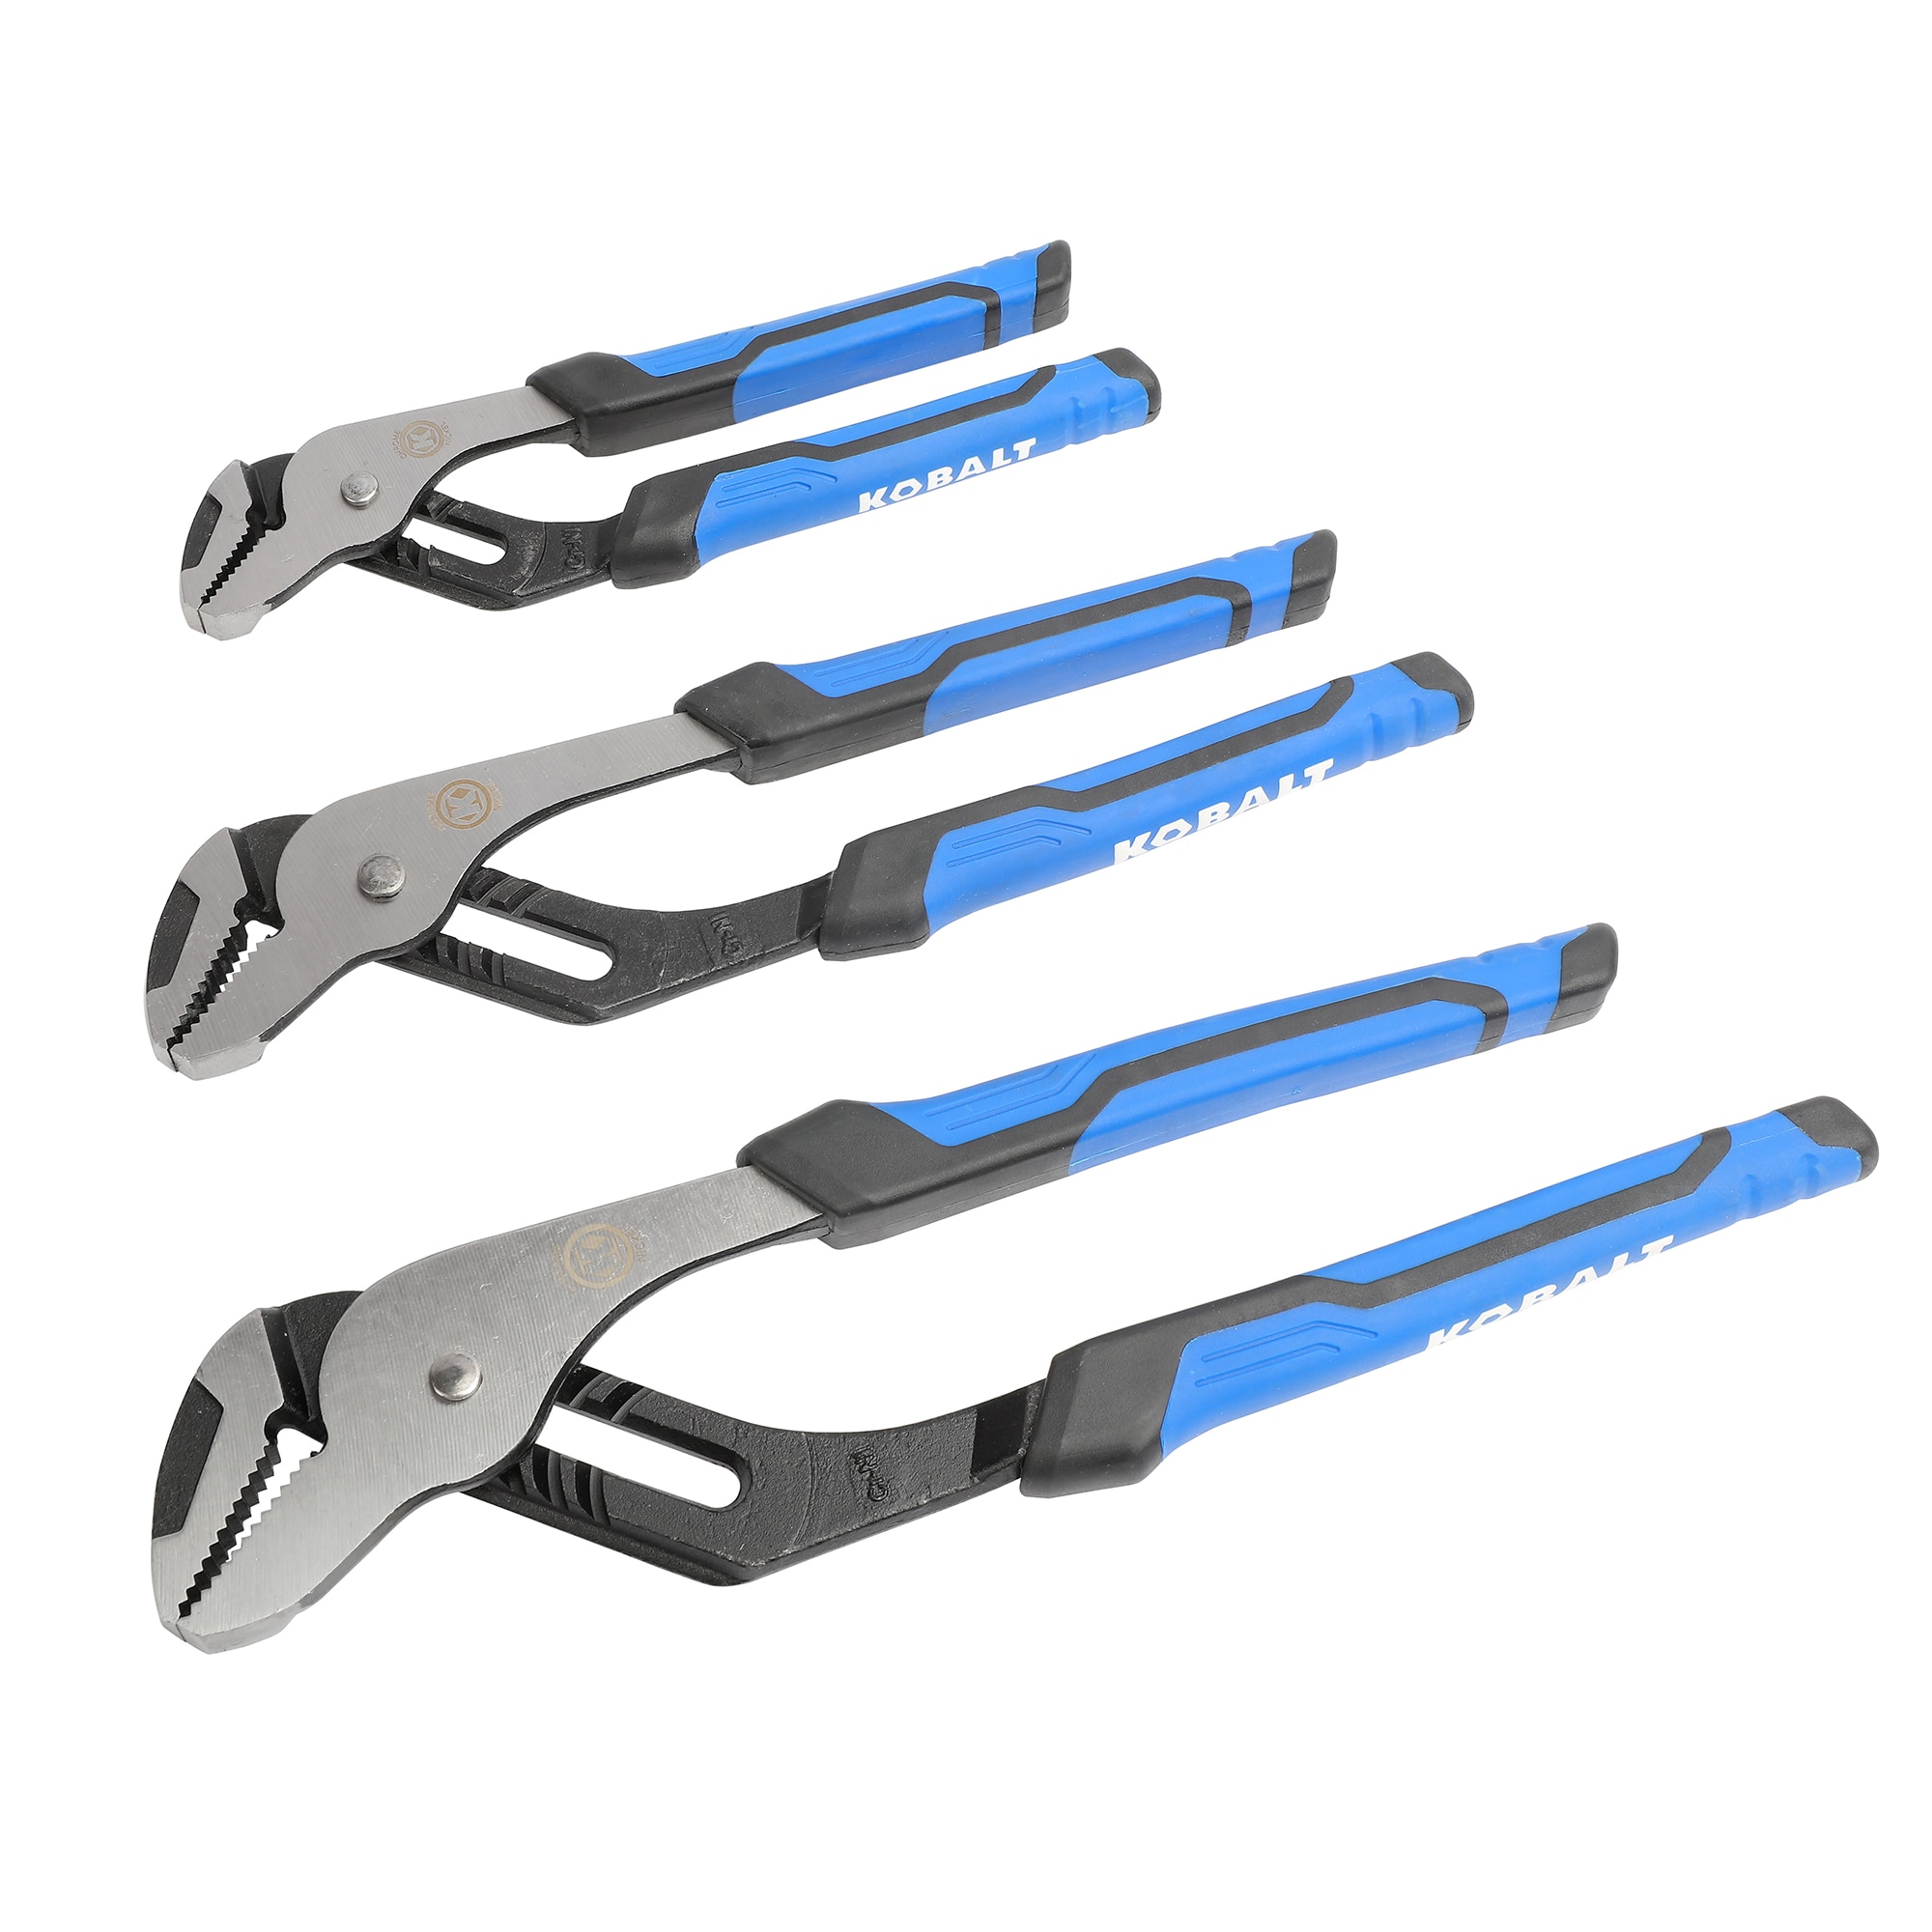 Kobalt 10-in Home Repair Tongue and Groove Pliers in the Pliers